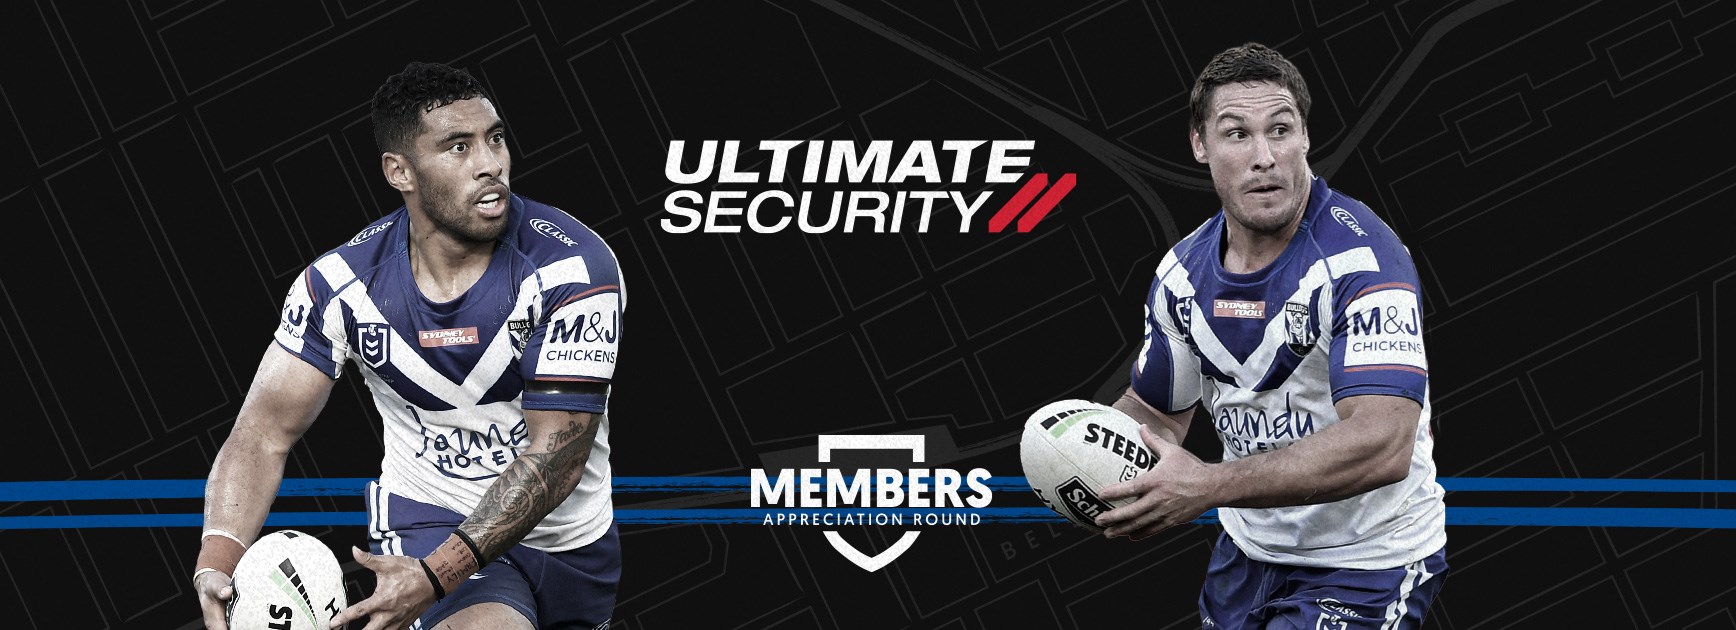 Members Appreciation Round Offer: Ultimate Security